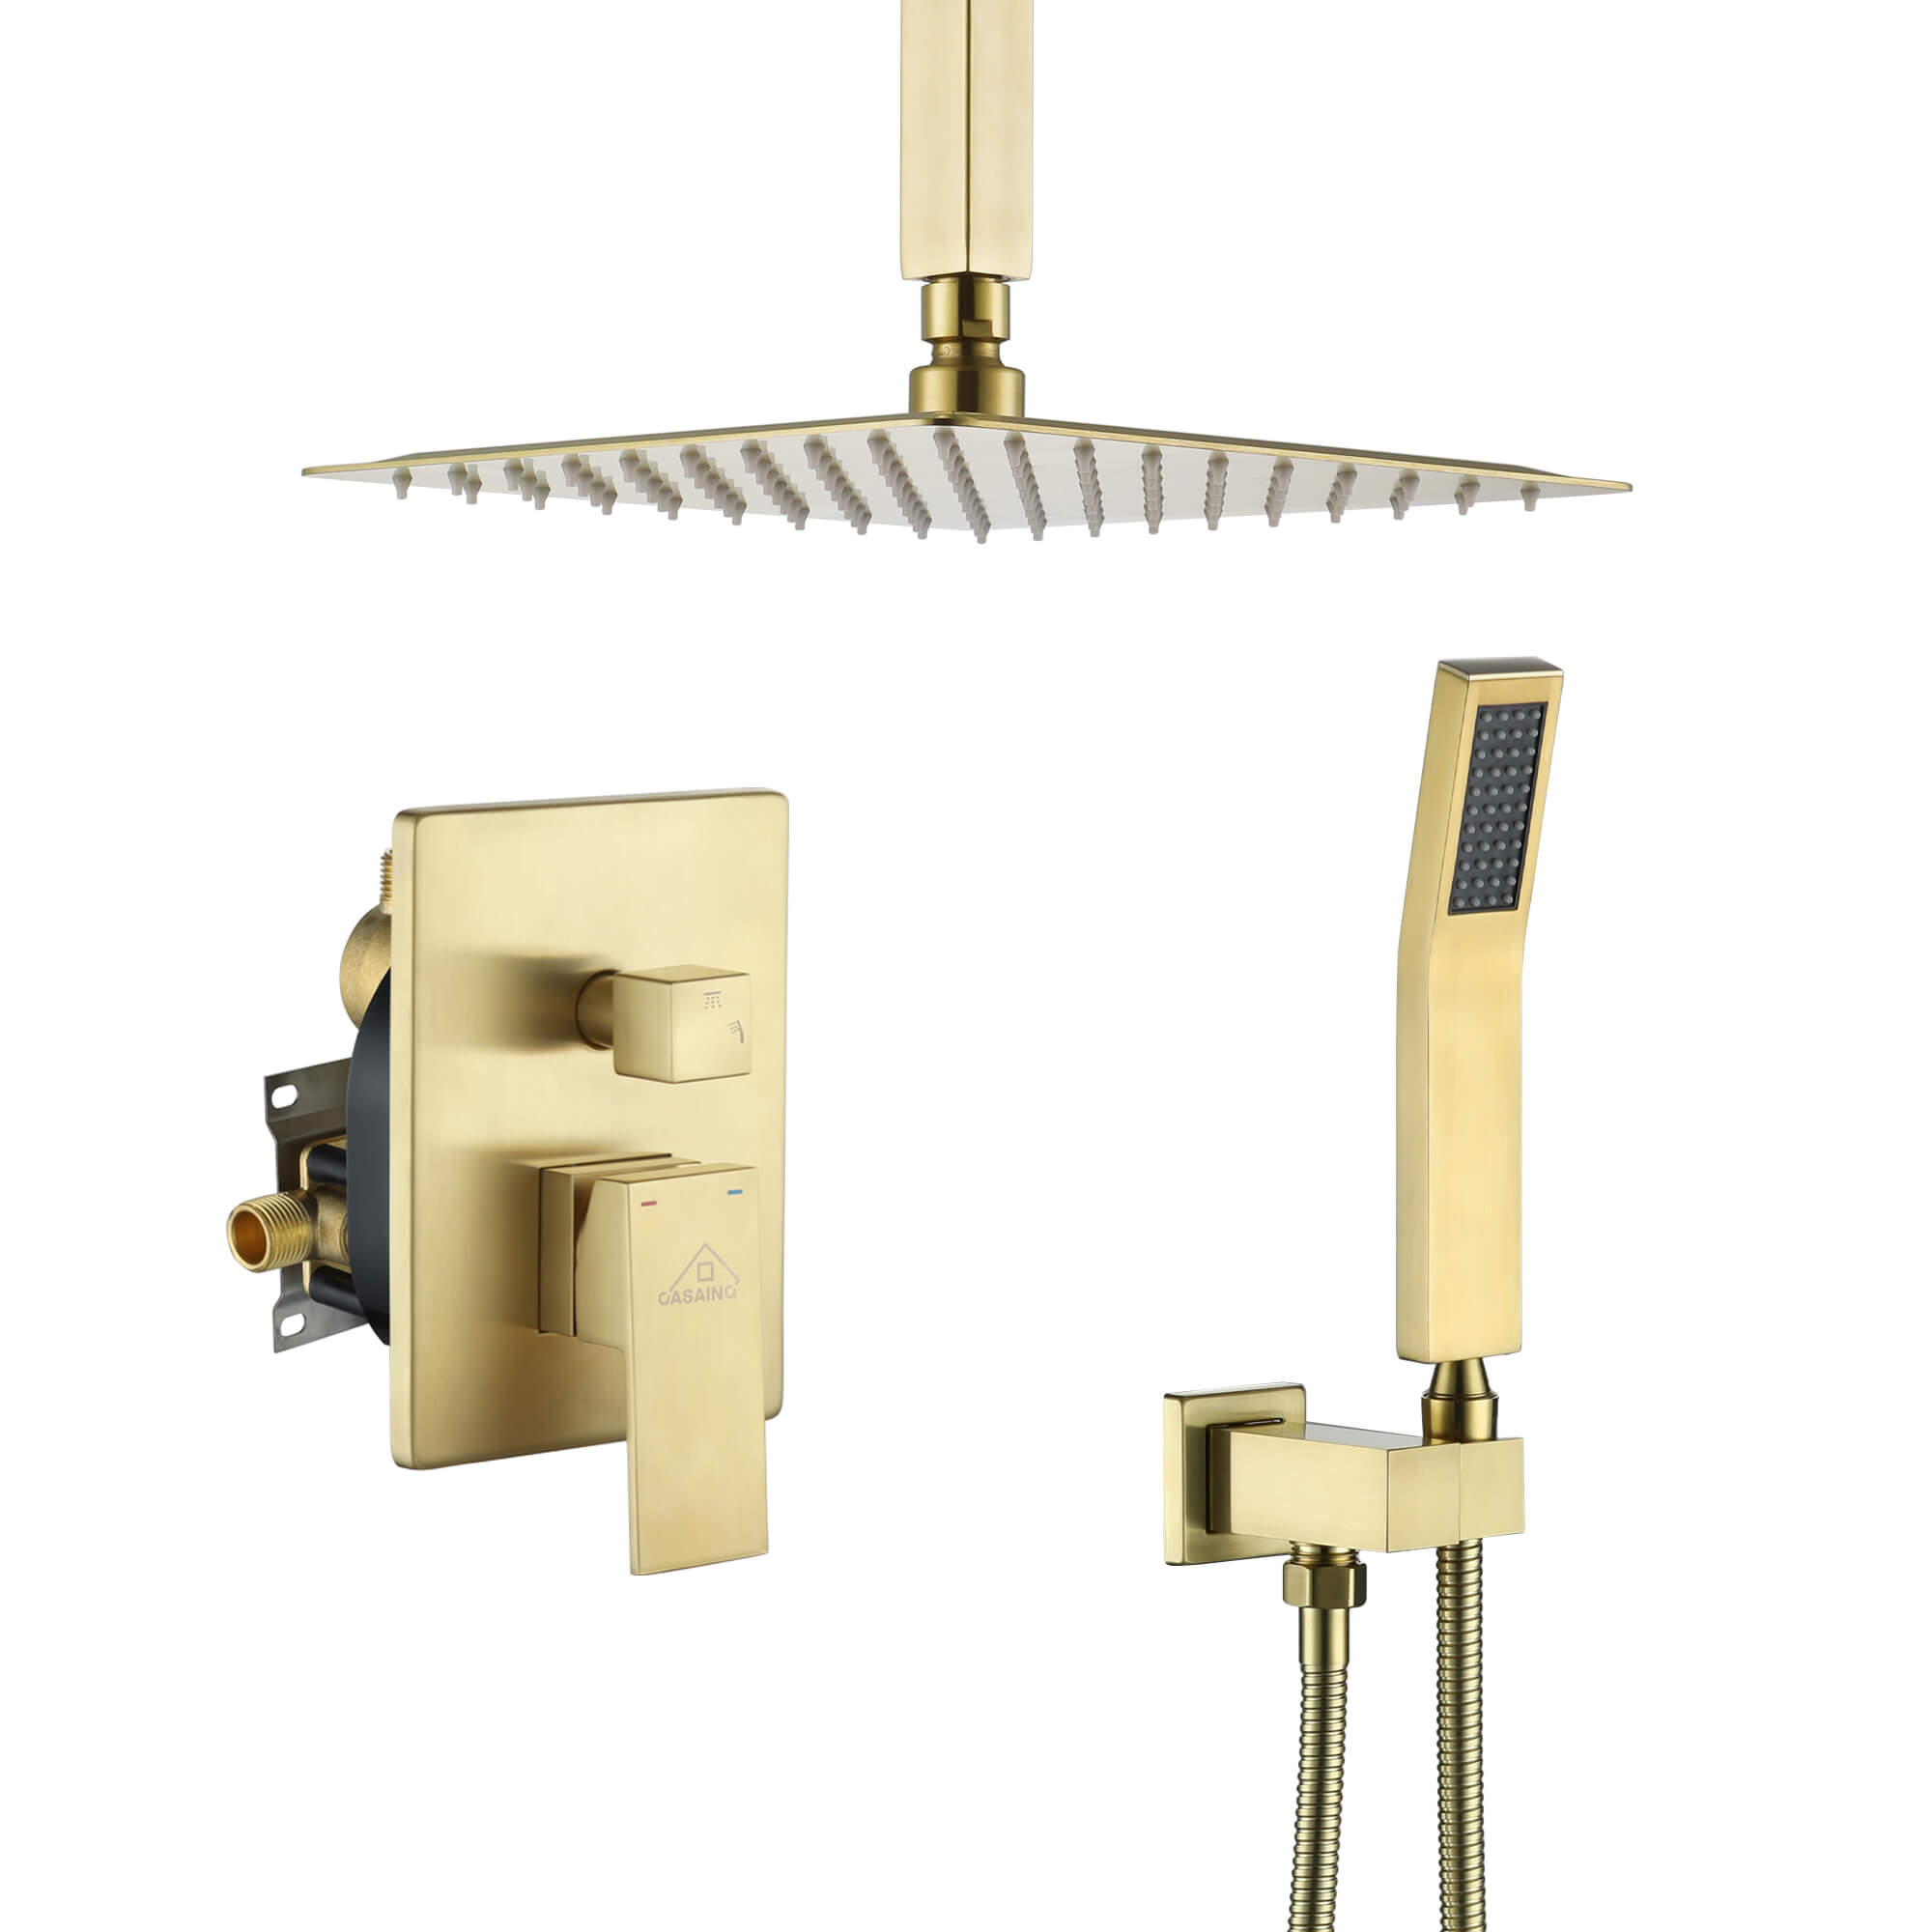 Casainc 2-Function Wall-Mounted/Ceiling-Mounted Shower System with Handheld Shower in Brushed Gold